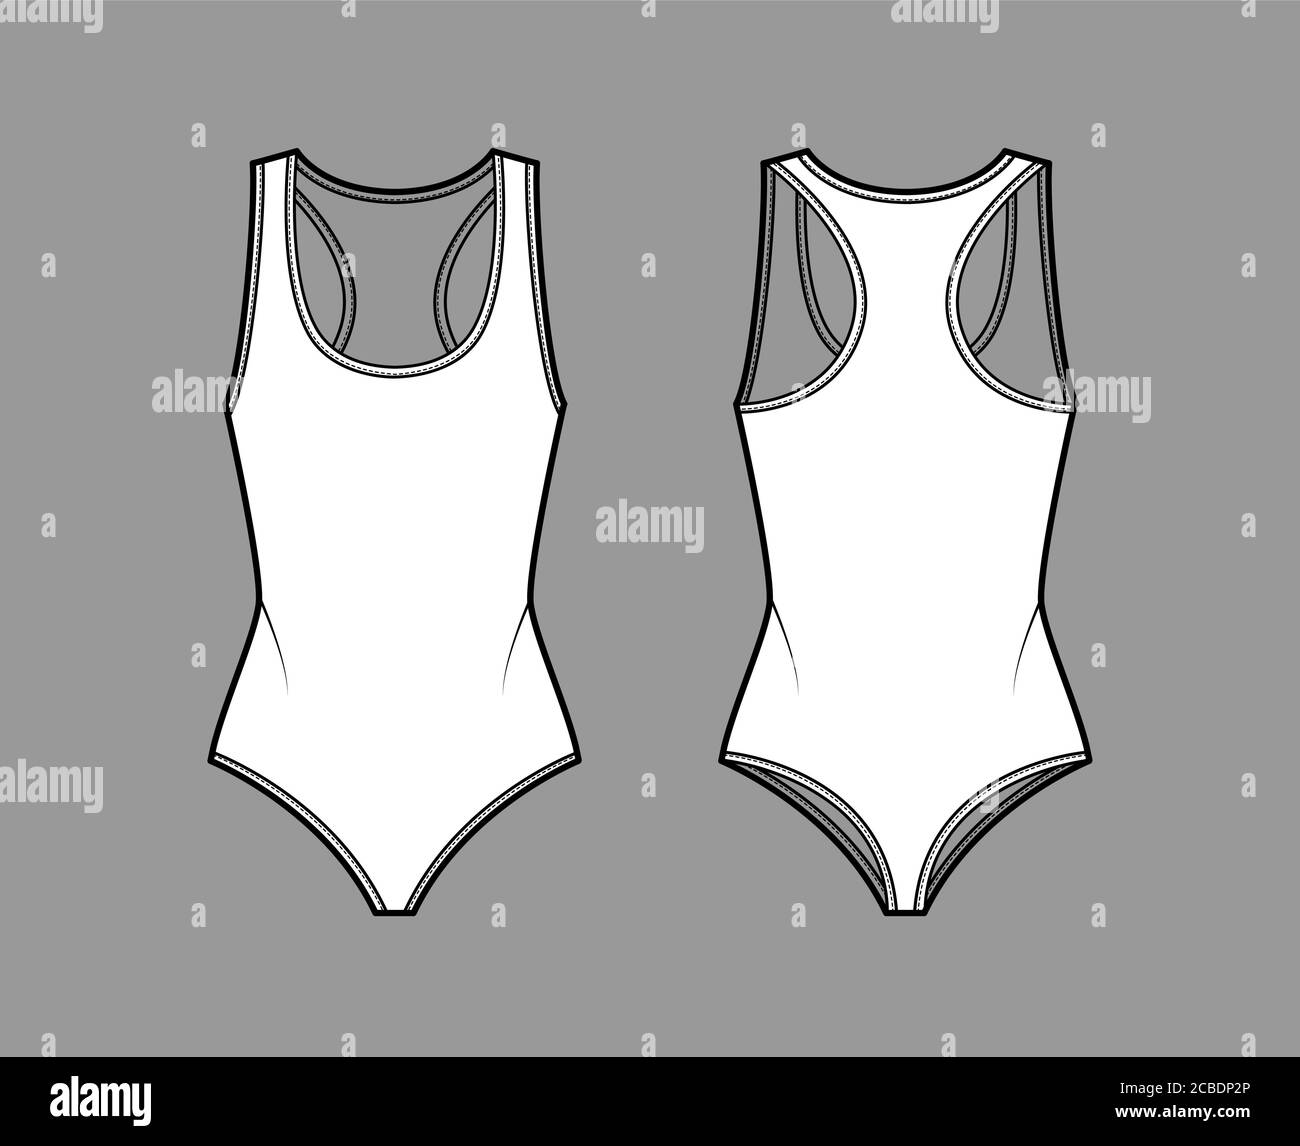 Cotton-jersey thong bodysuit technical fashion illustration with racer ...